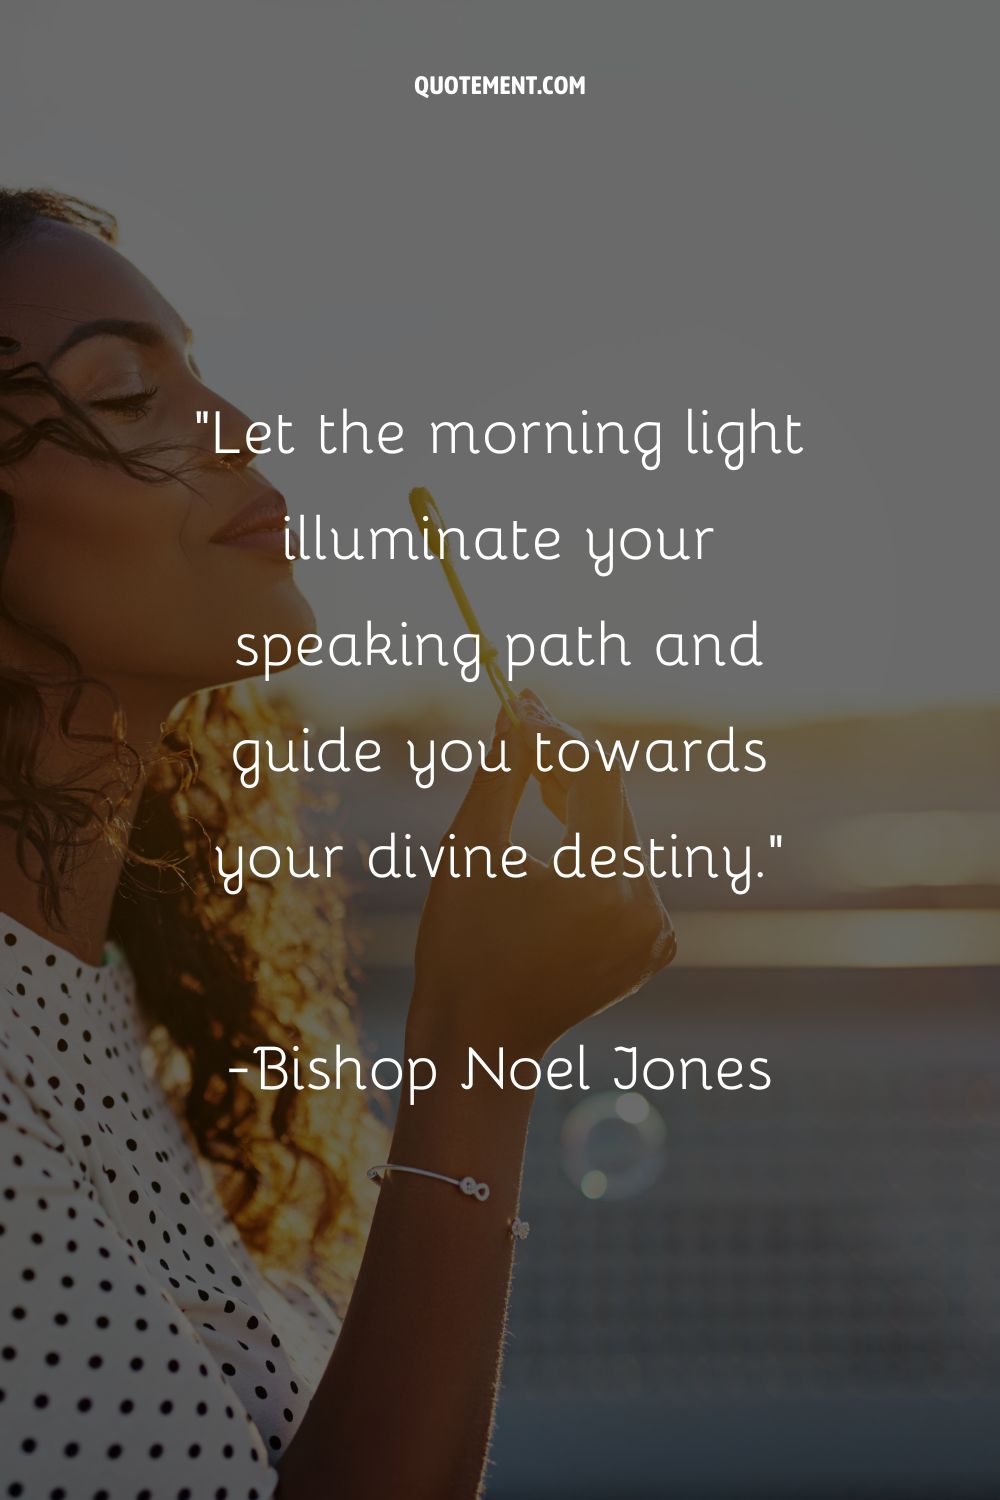 Let the morning light illuminate your speaking path and guide you towards your divine destiny.